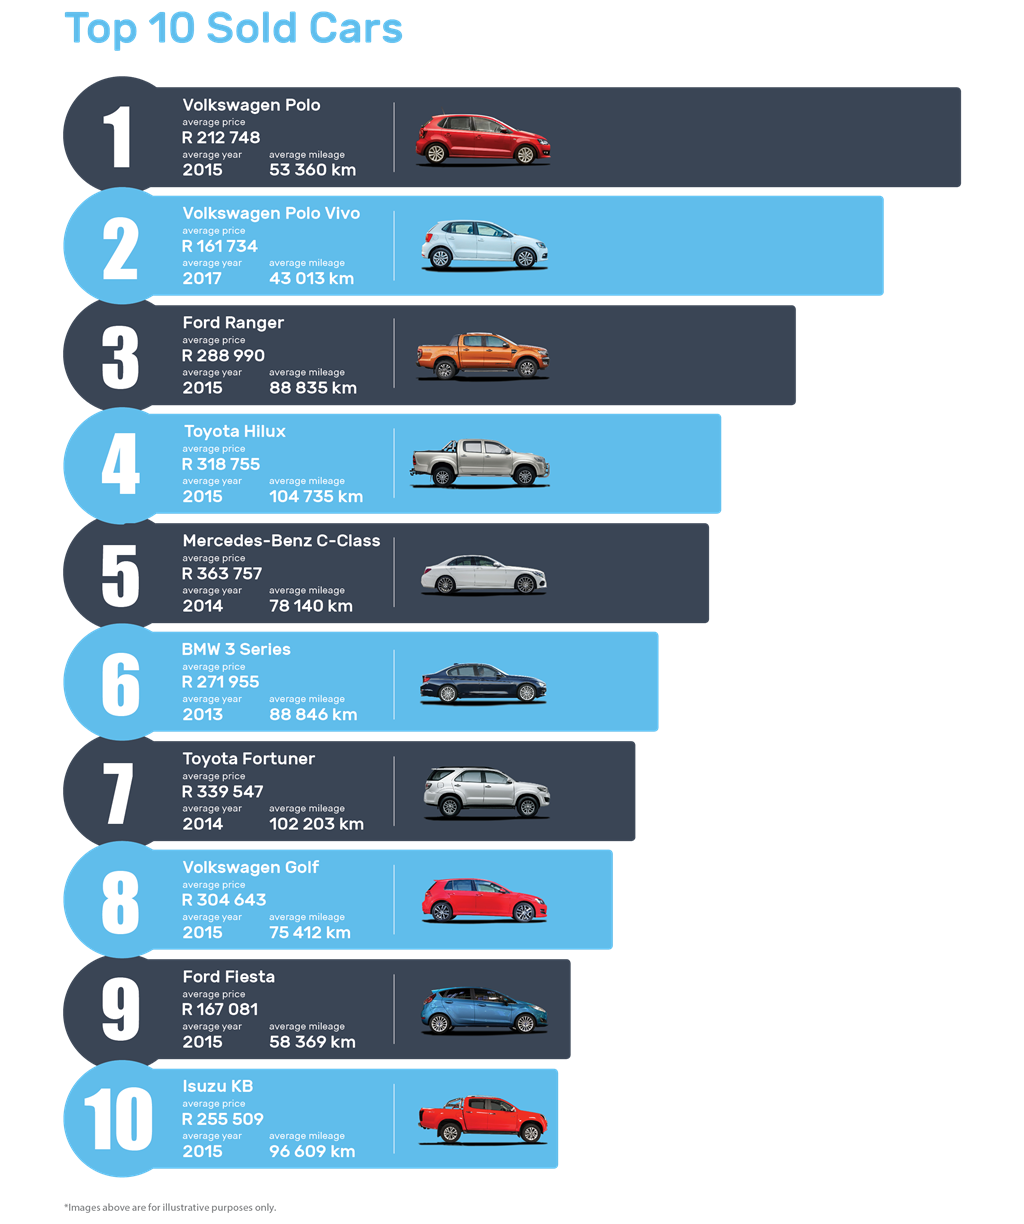 SEE | 8 facts you should know about South Africa’s car market | Wheels